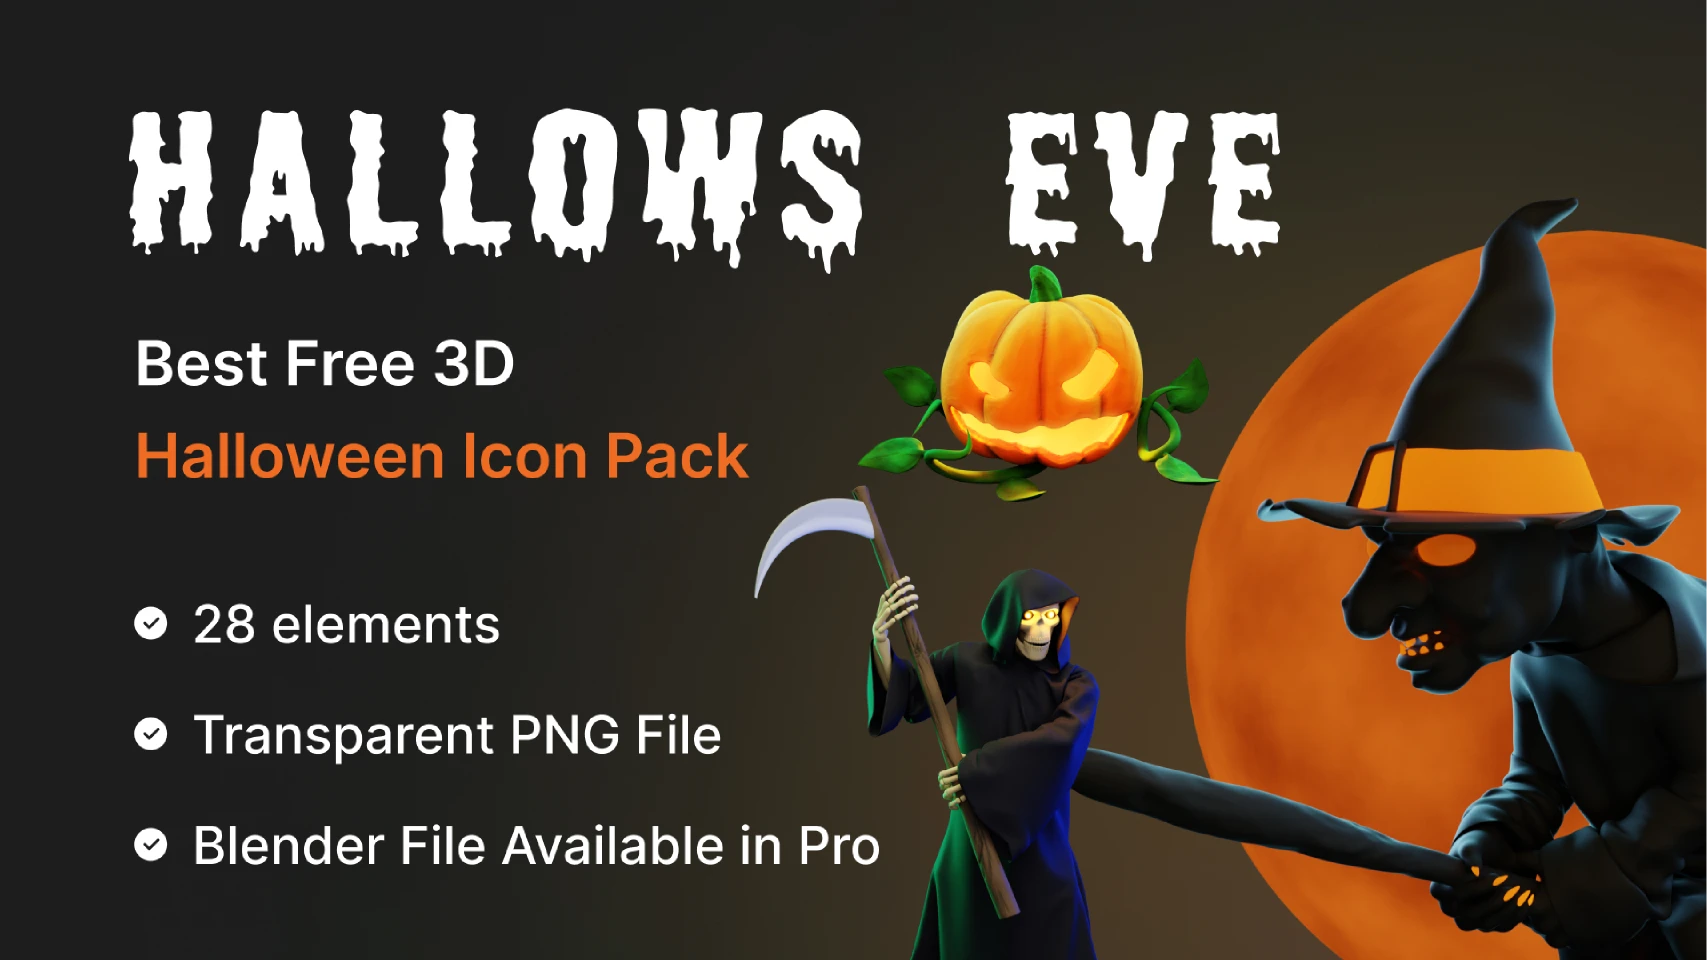 Hallows Eve  Free Halloween 3D Icon Pack for Figma and Adobe XD